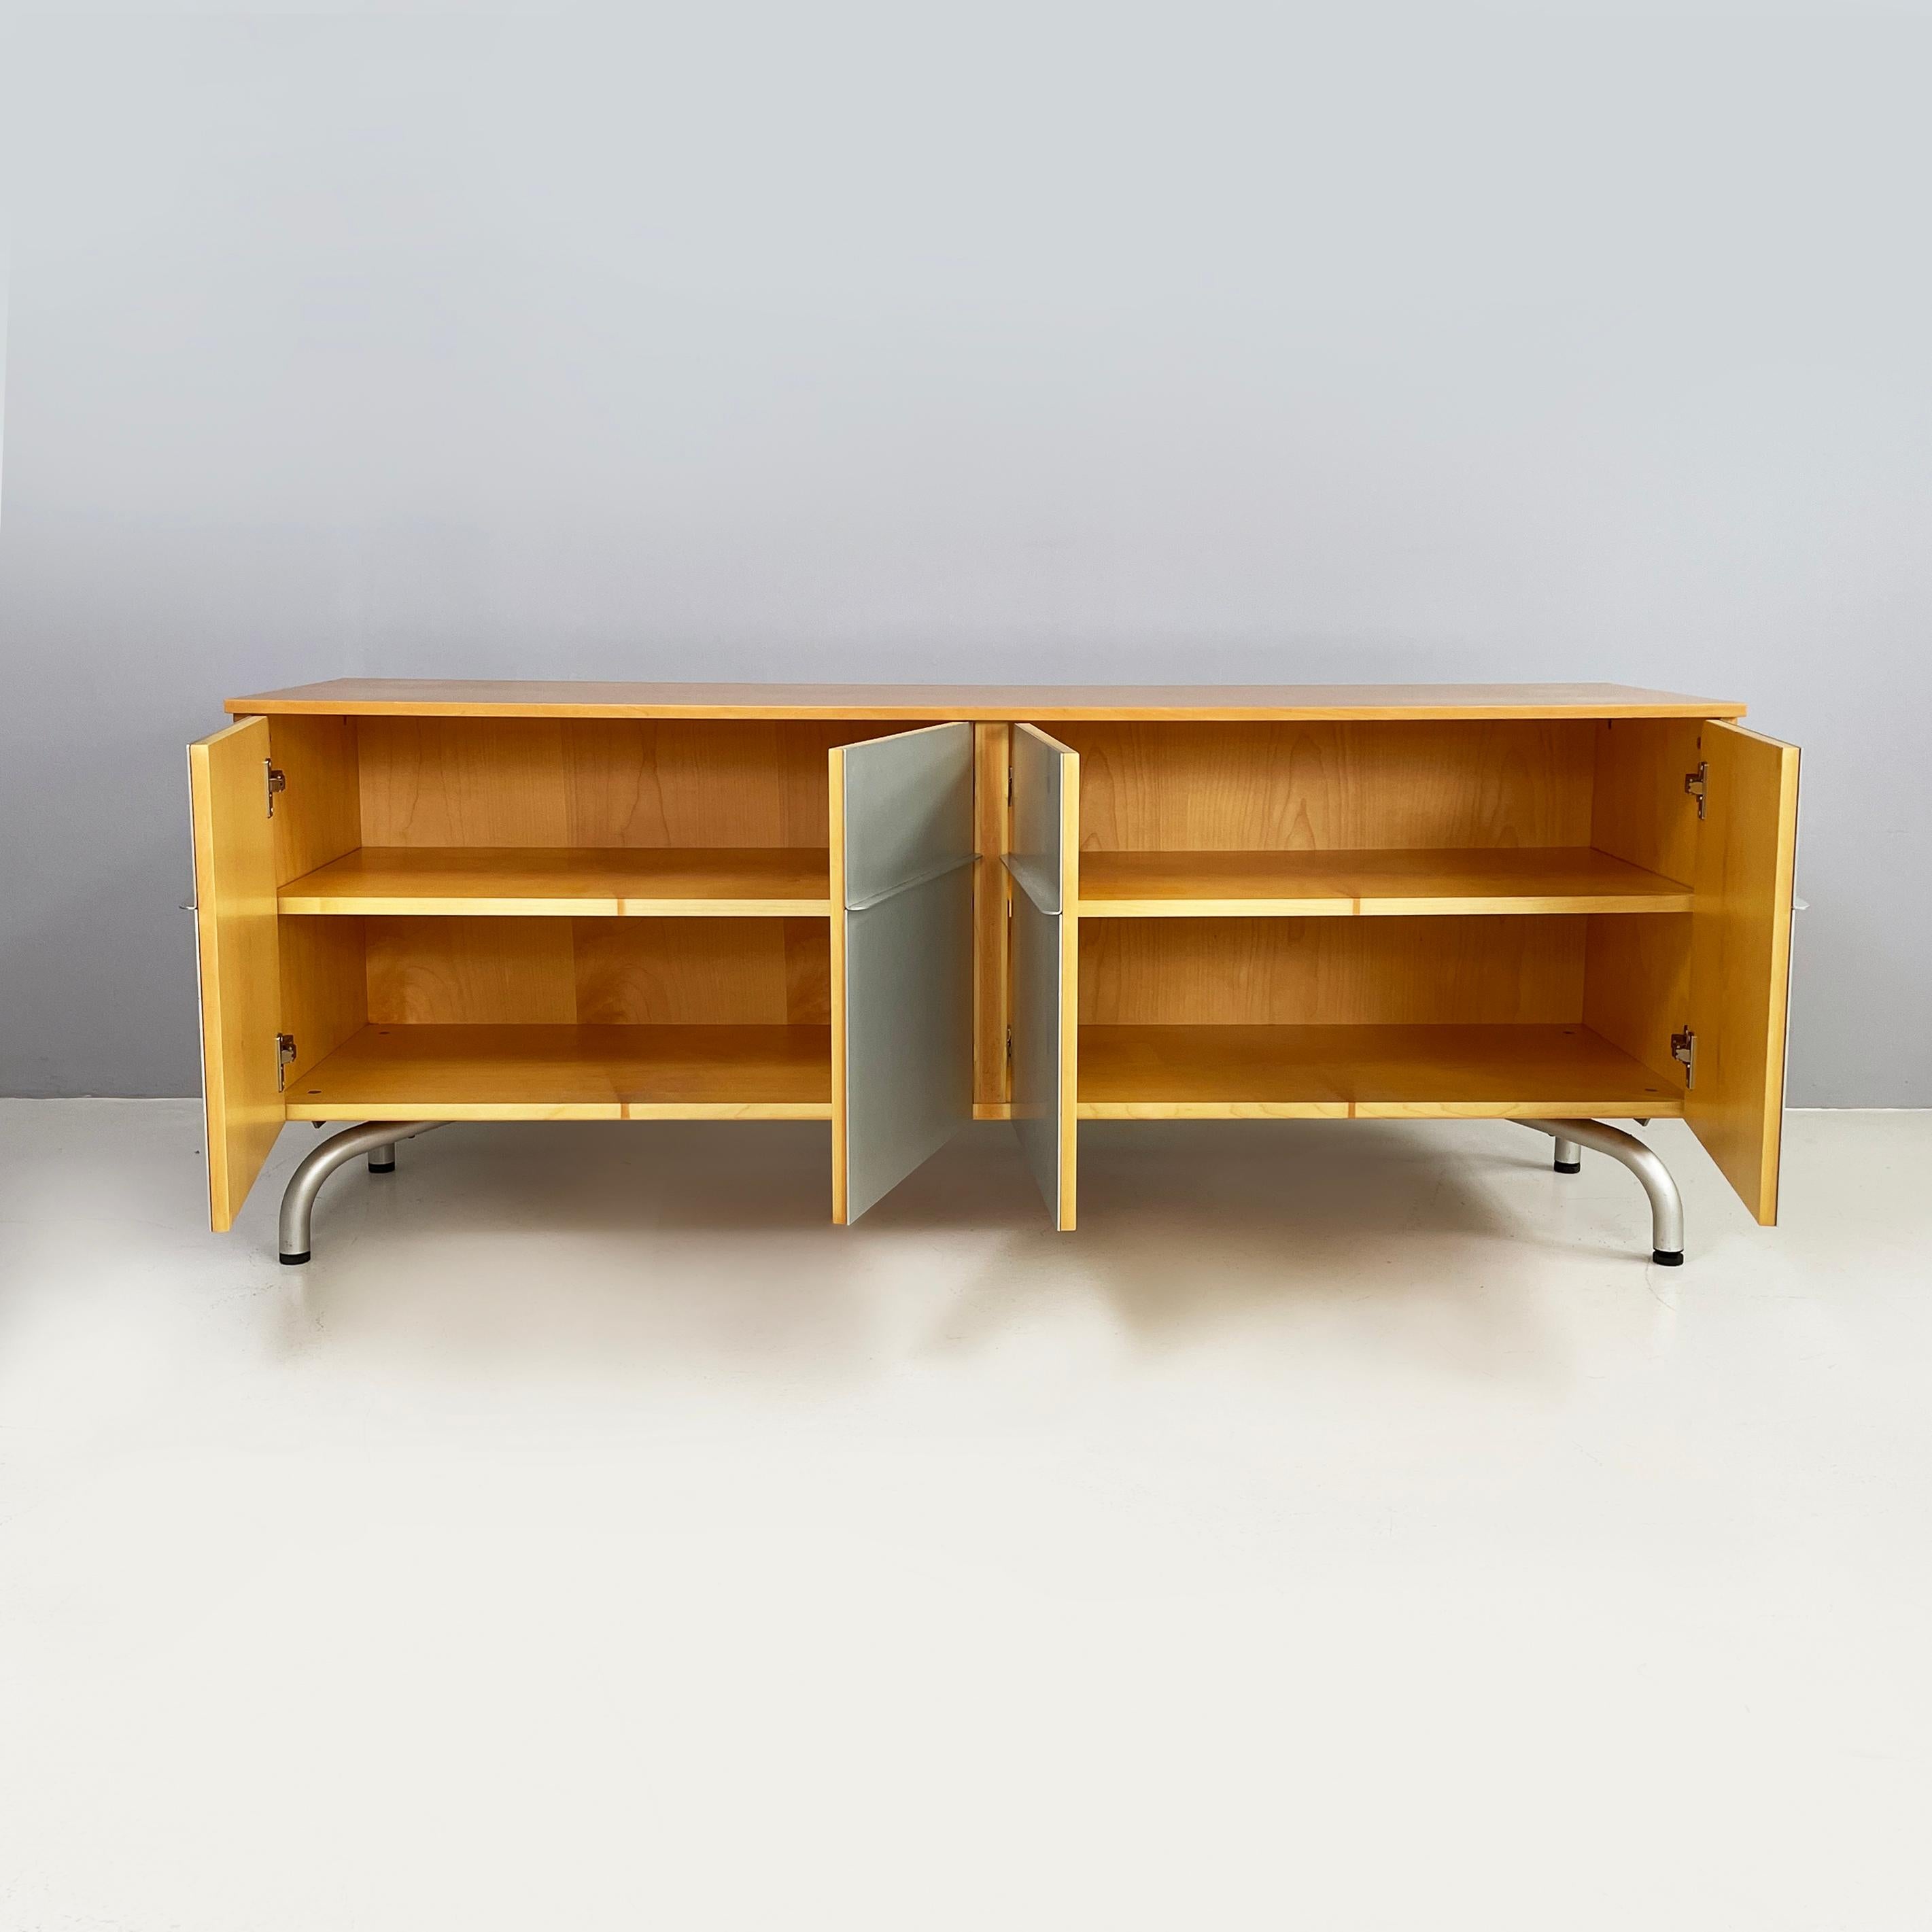 Modern Italian modern wood and metal sideboard by Vico Magistretti for De Padova, 1980s For Sale